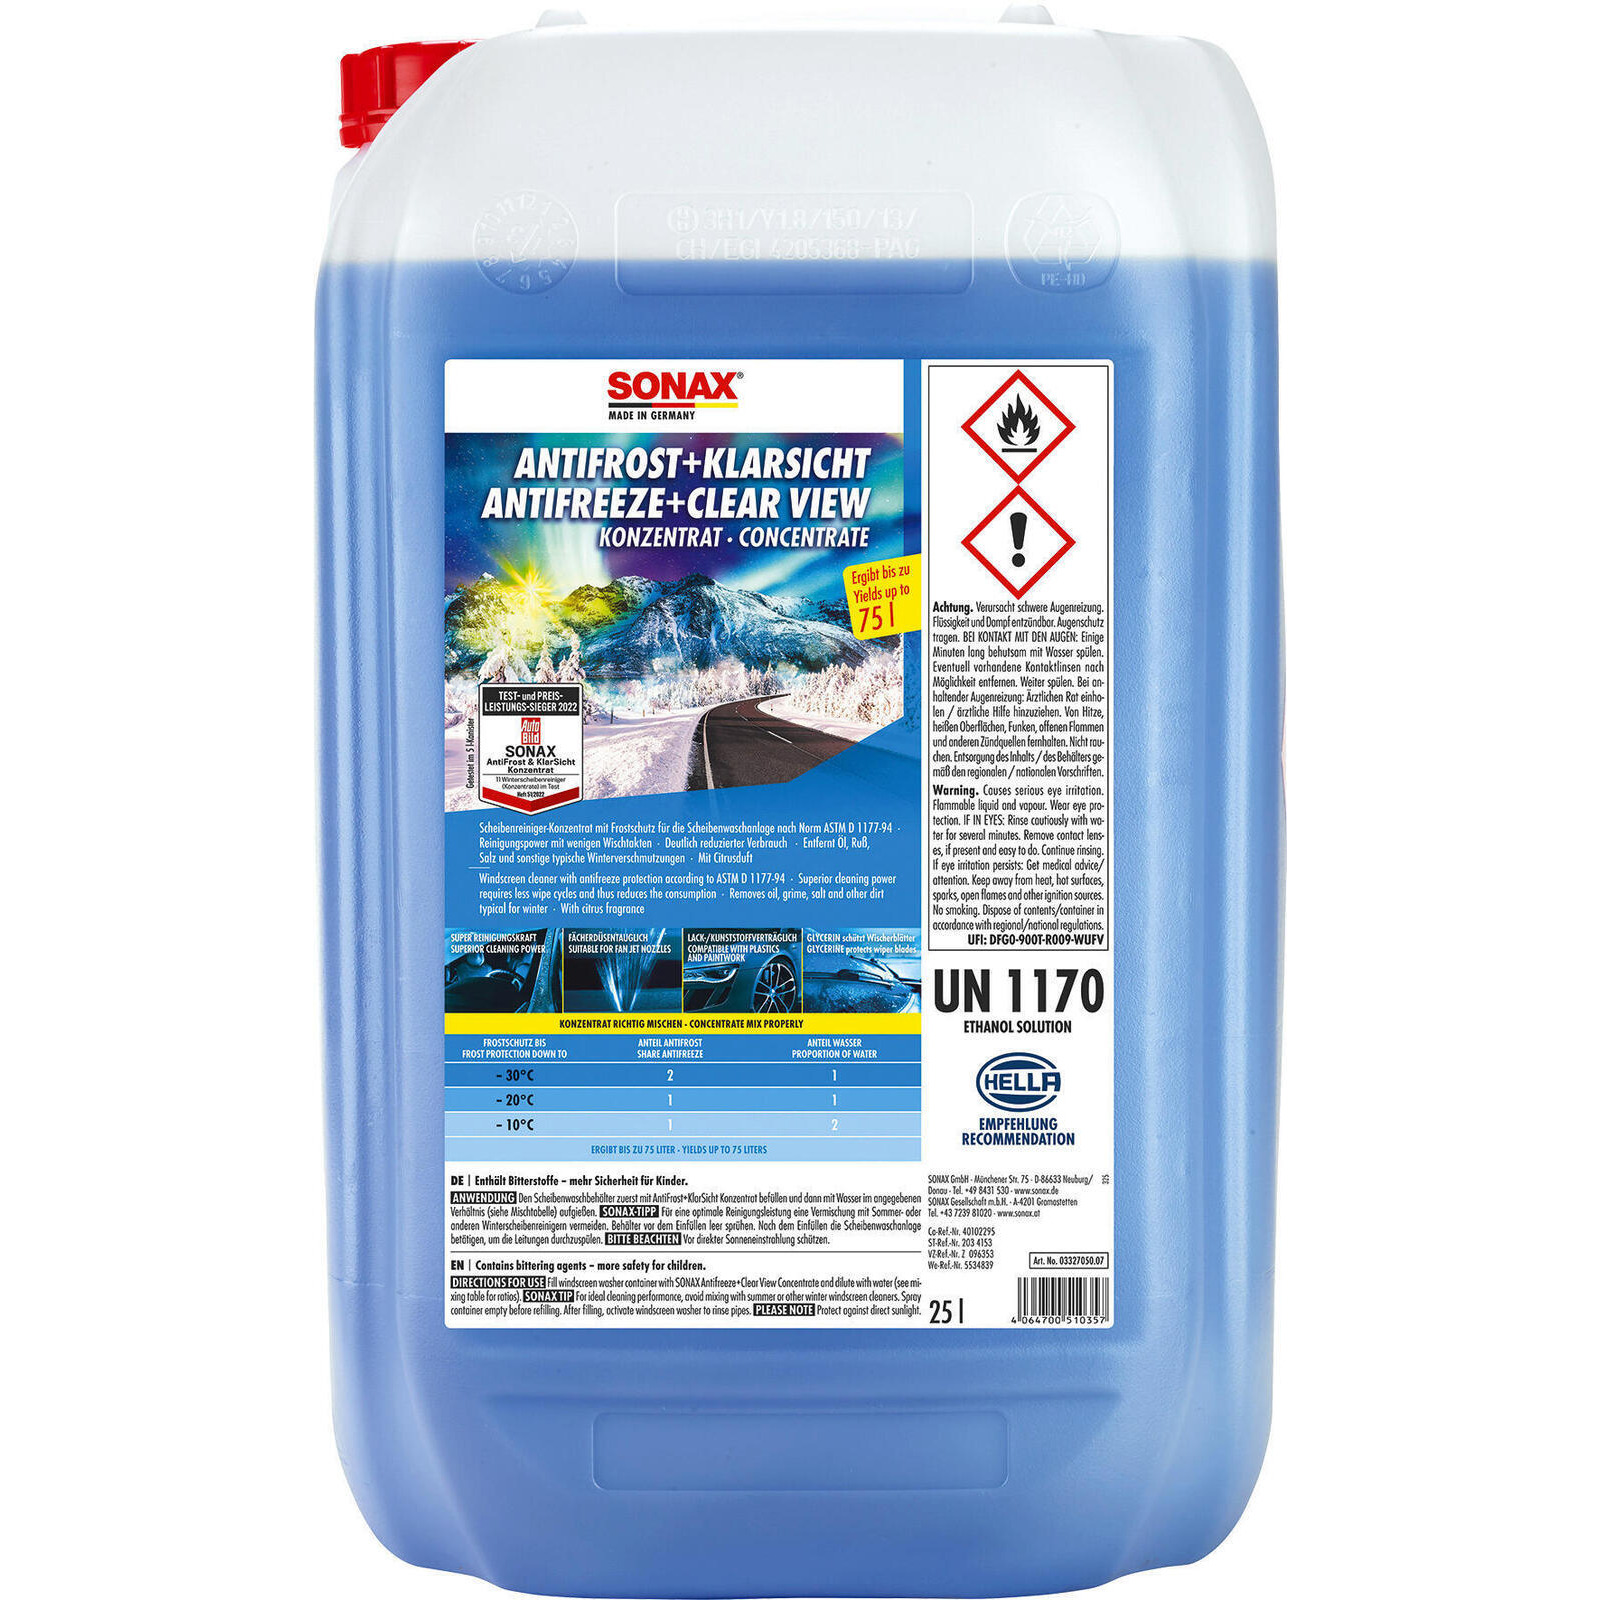 SONAX Antifreeze, window cleaning system Antifreeze + clear view concentrate